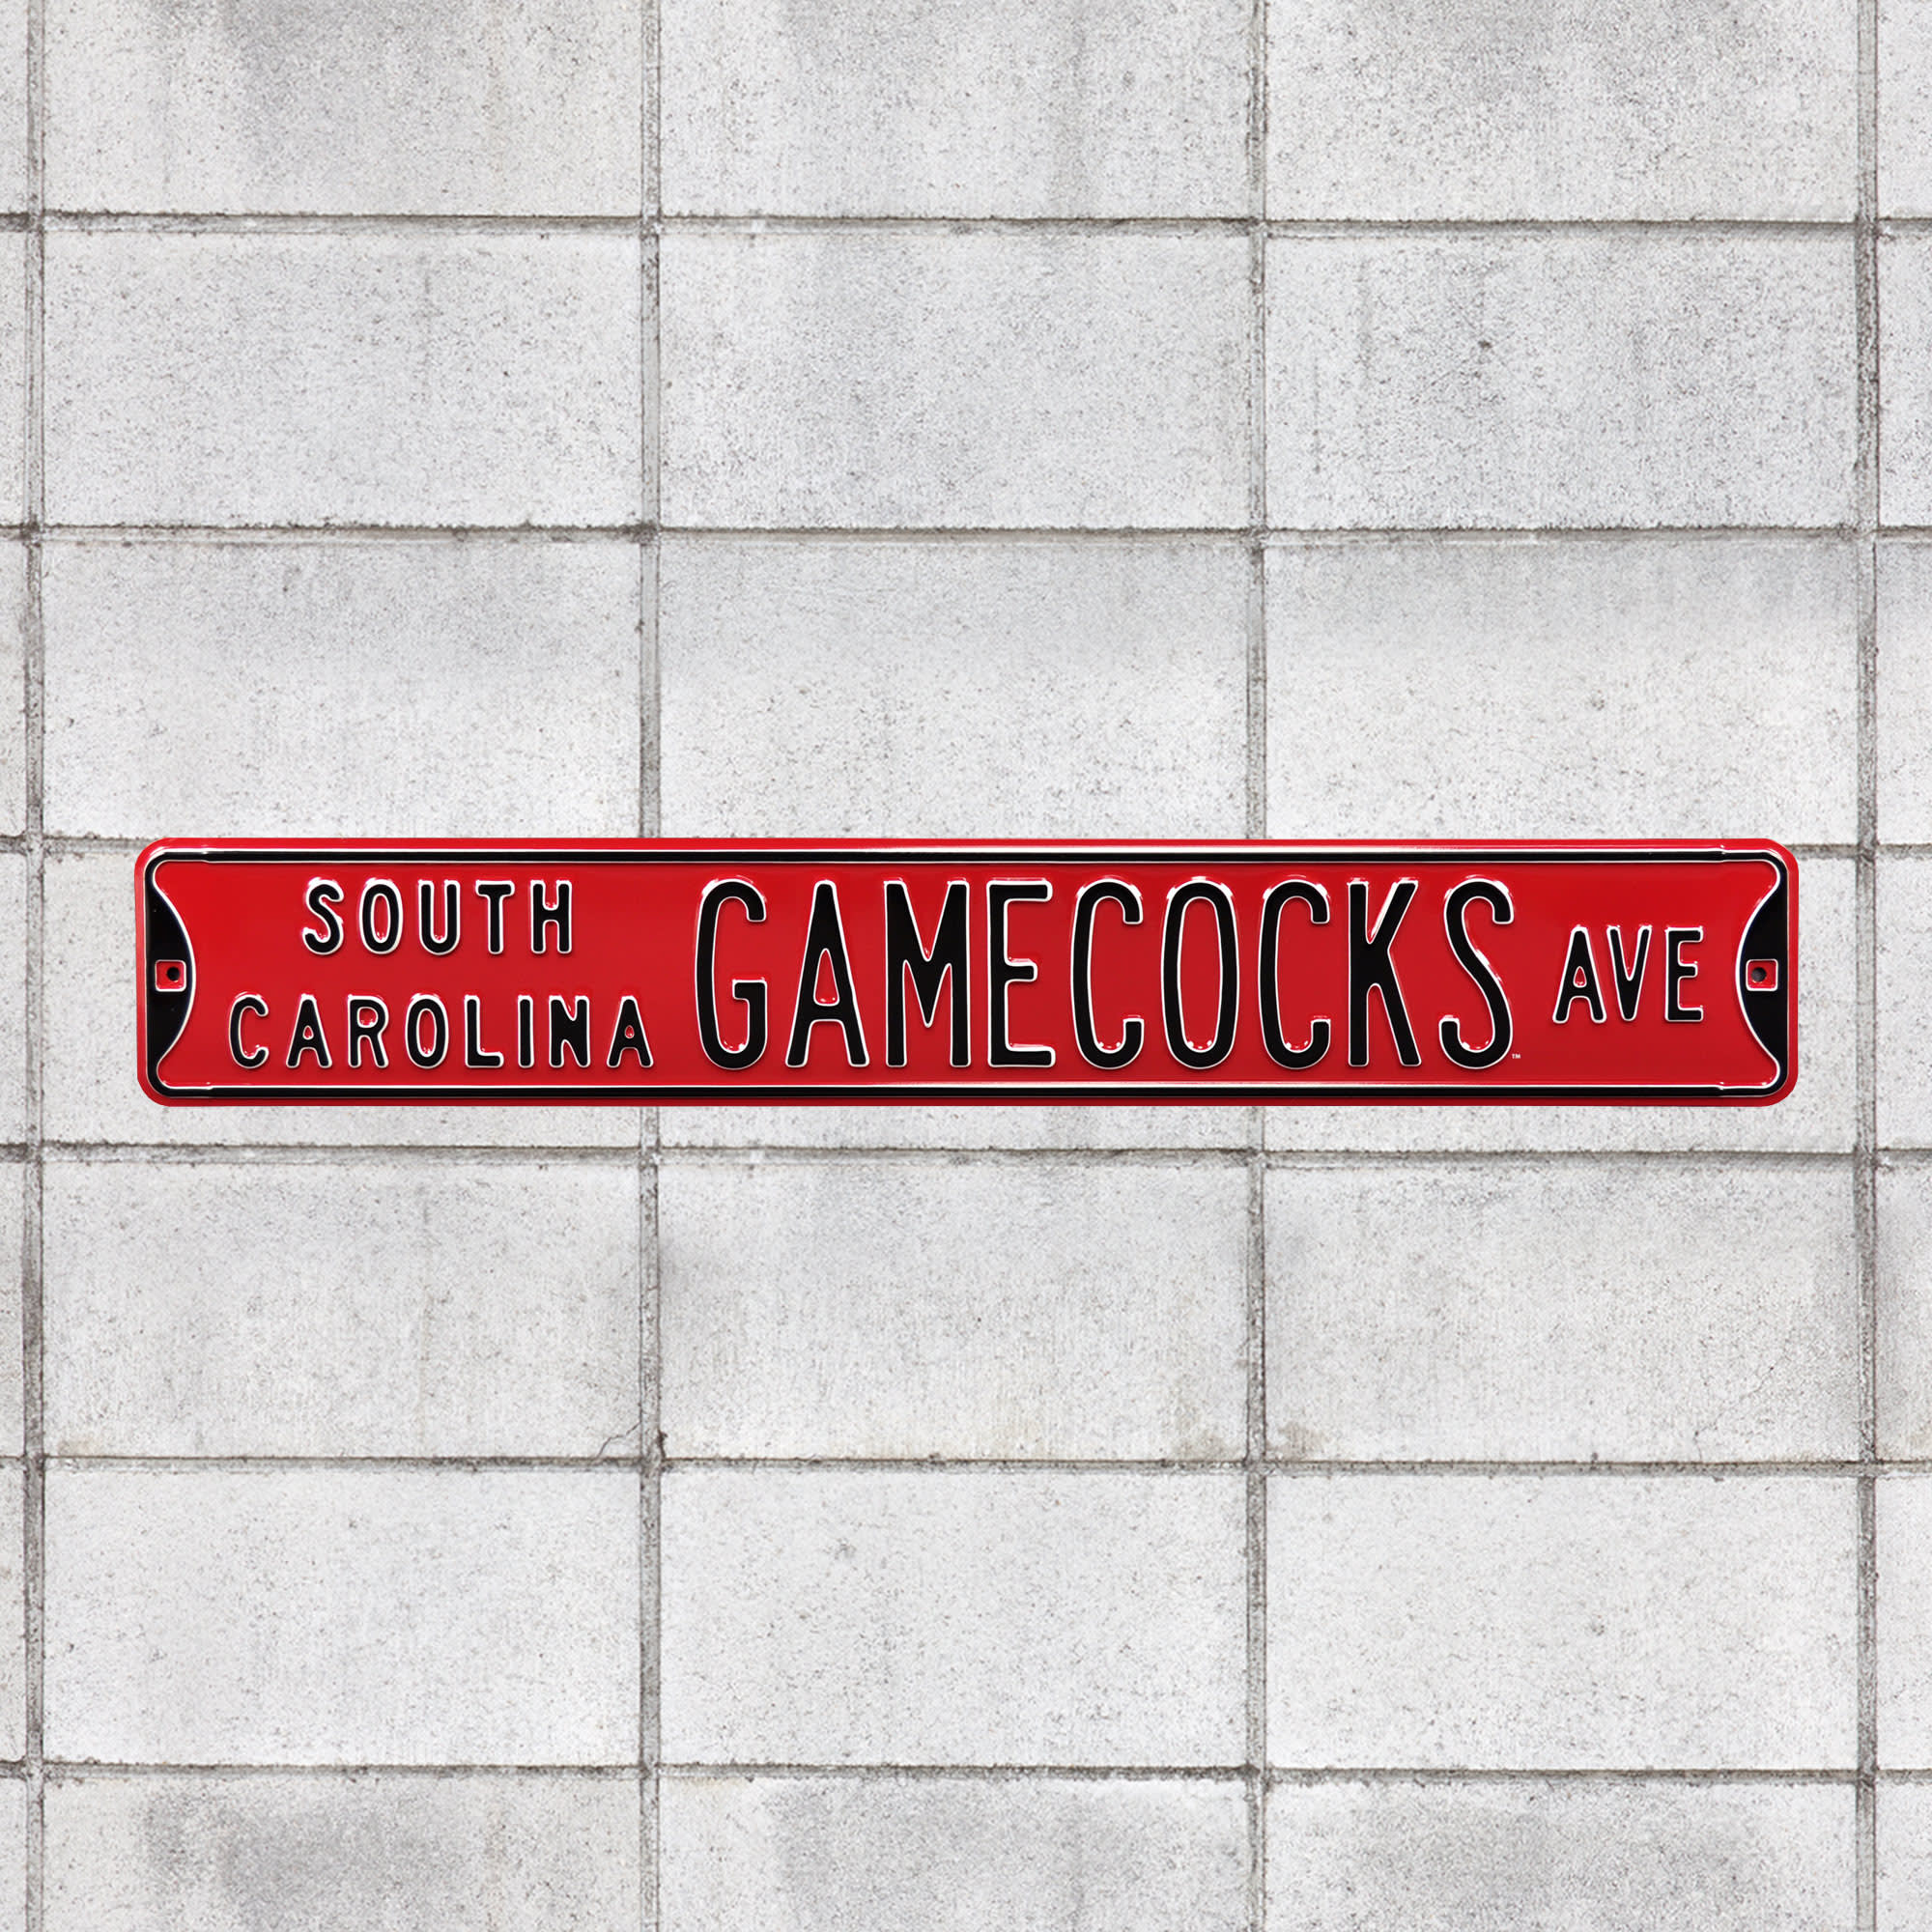 South Carolina Gamecocks: South Carolina Gamecocks Avenue - Officially Licensed Metal Street Sign 36.0"W x 6.0"H by Fathead | 10